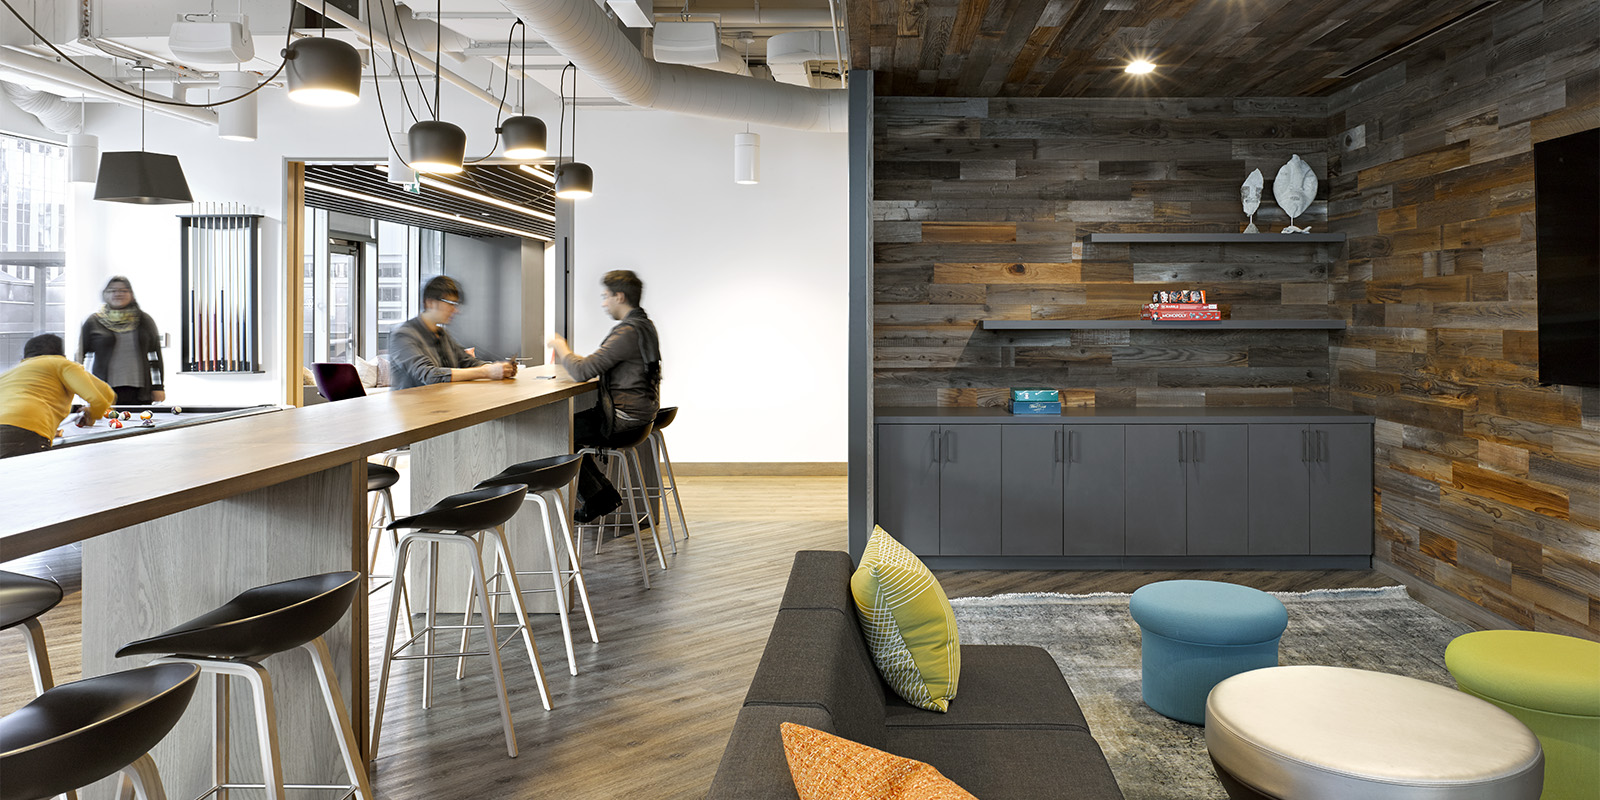 OMERS office social zone with bar seating, industrial lighting, wood wall, and colourful upholstery